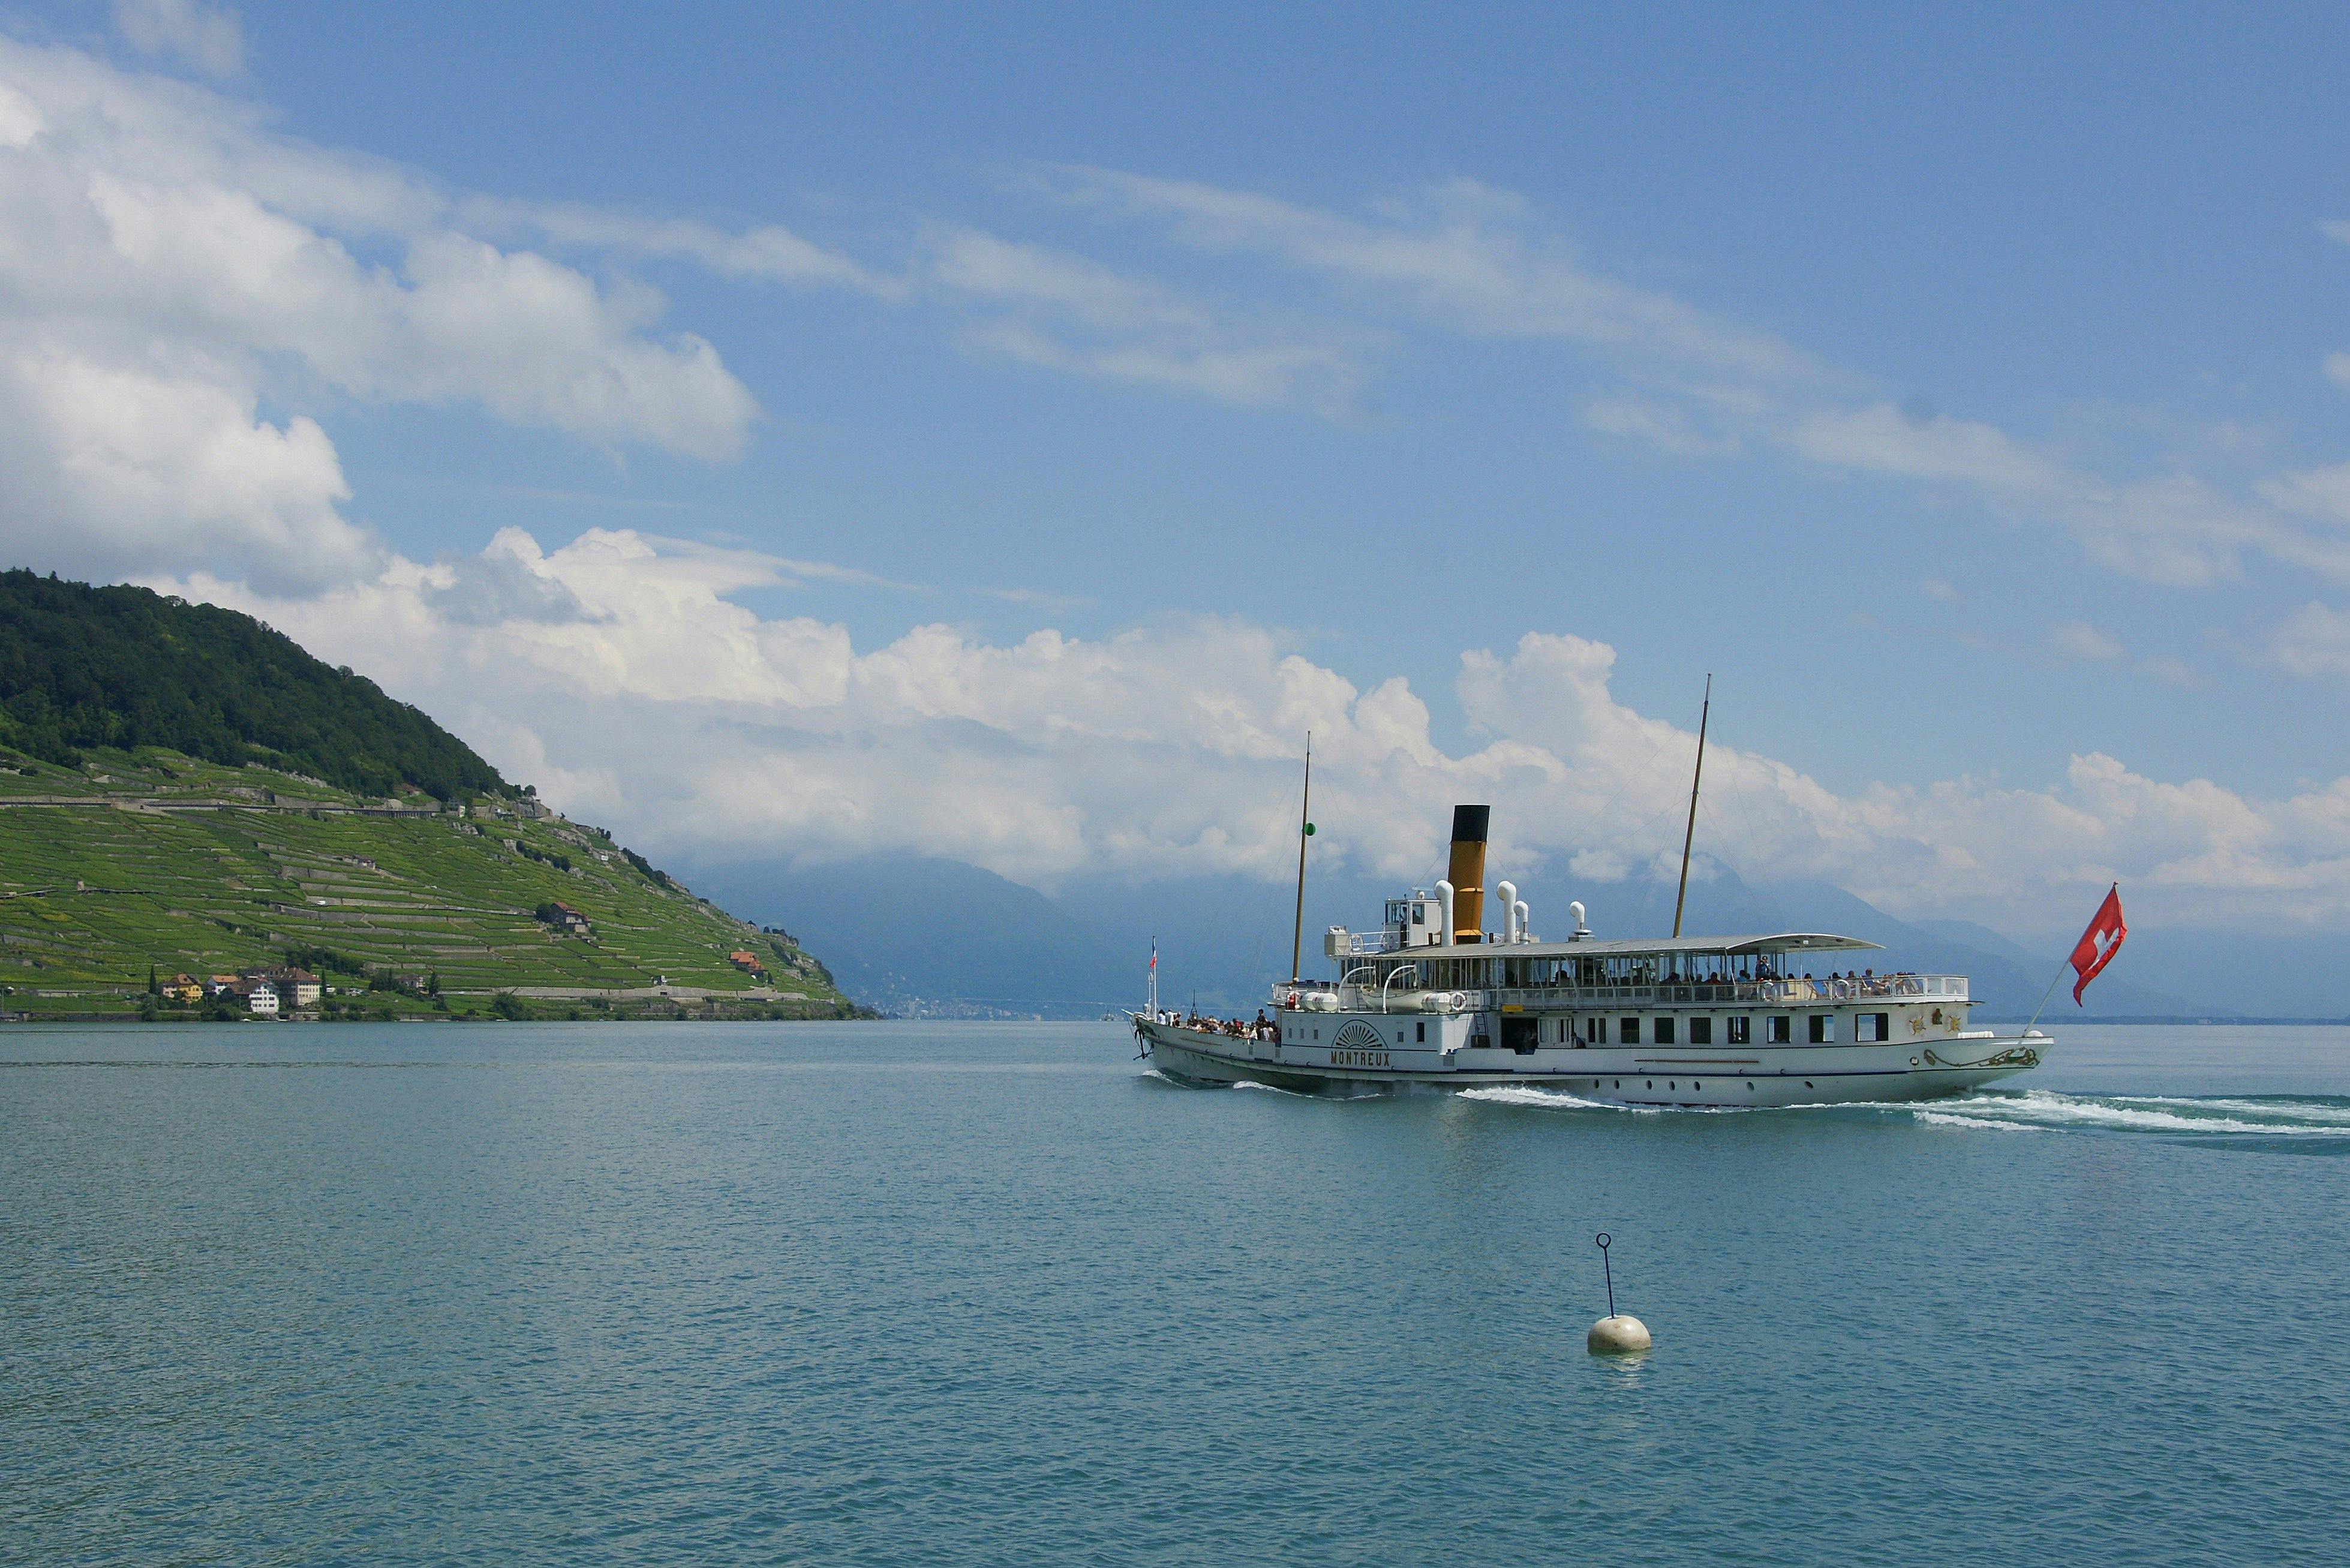 Cruise to discover the Lavaux vineyards and the Montreux-Vevey Region from Lausanne